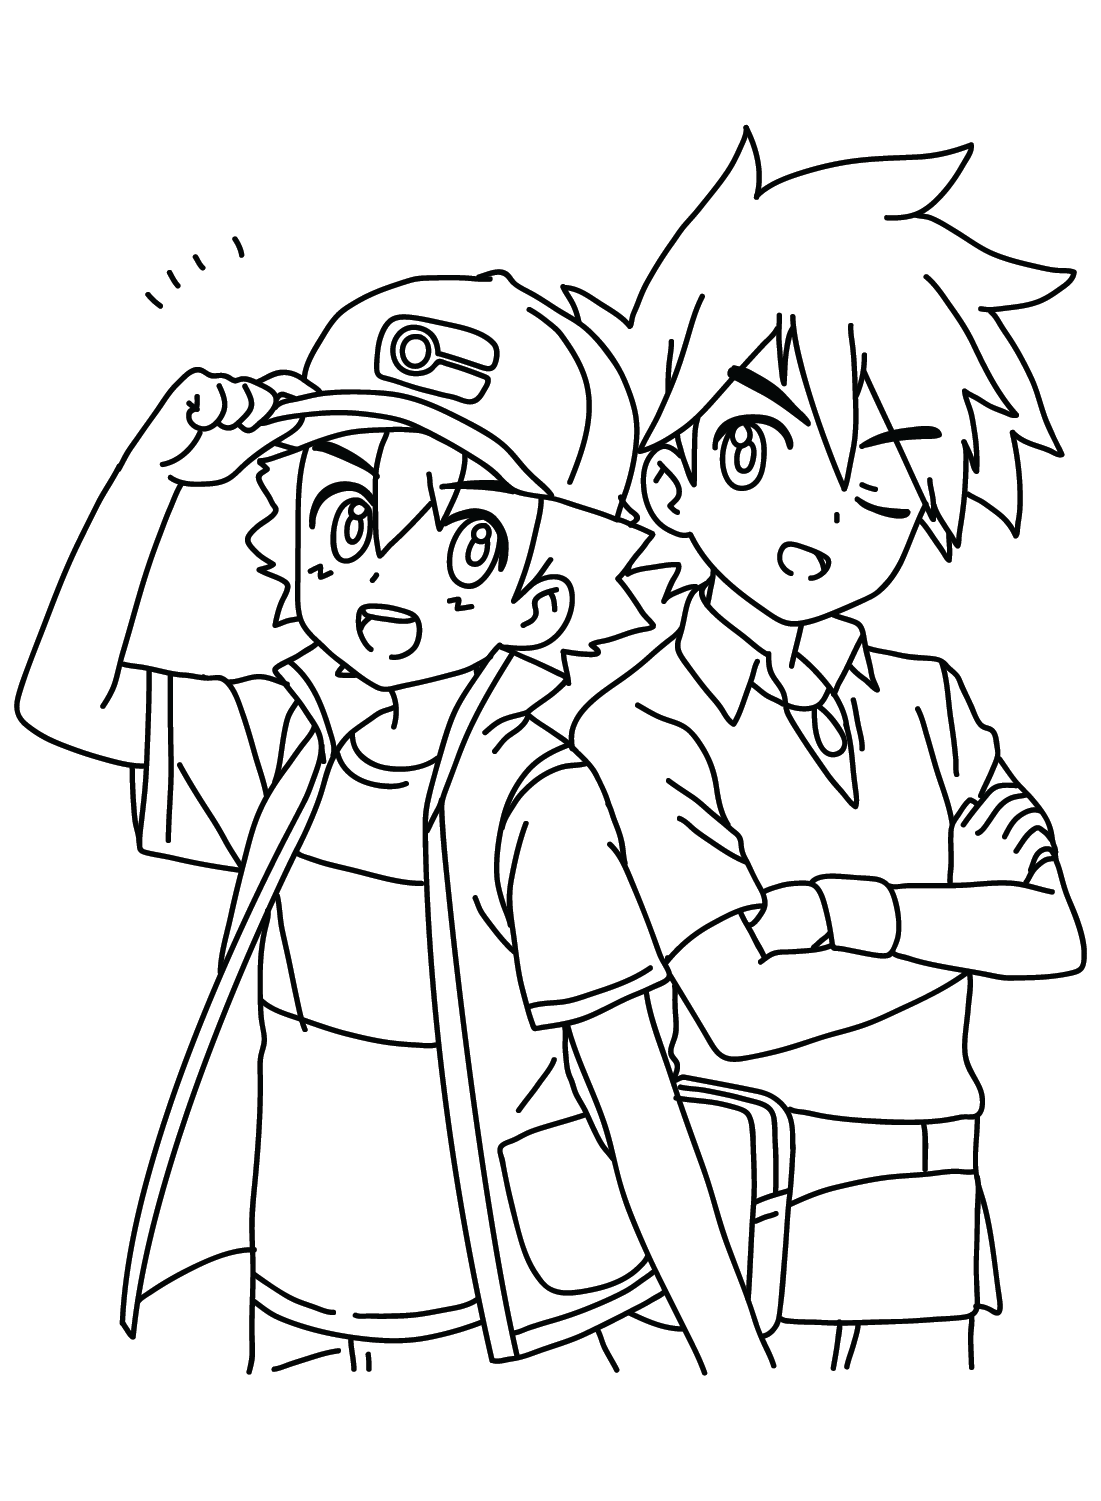 Gary Oak and Ash Pokemon Coloring Page from Ash Ketchum